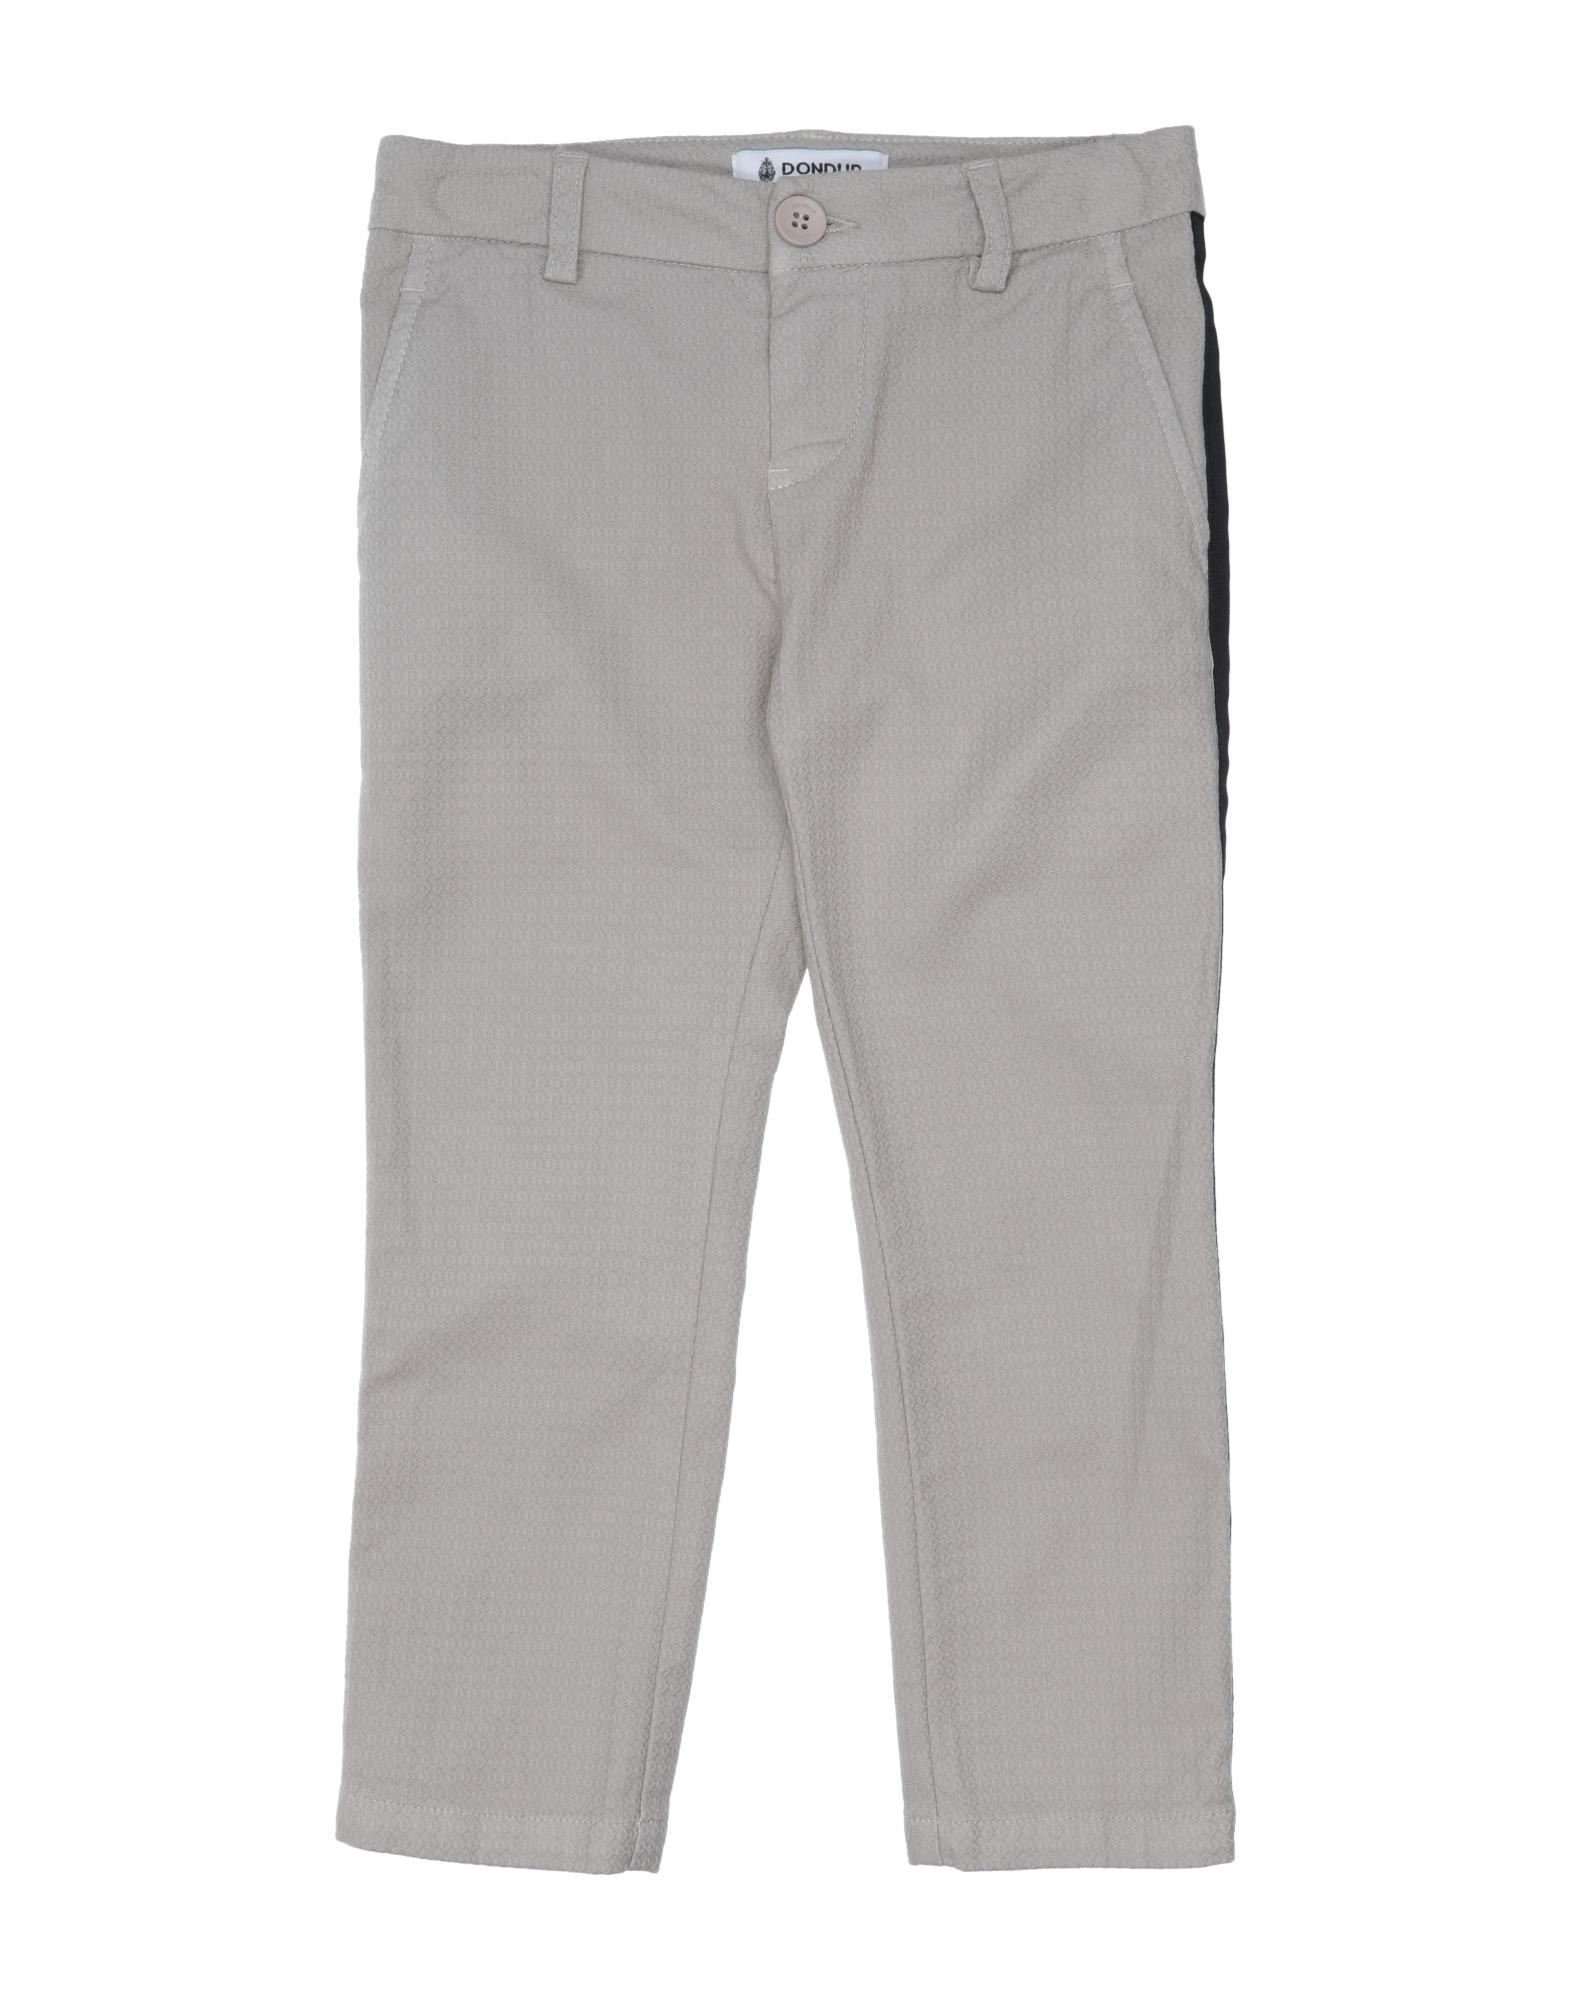 Dondup chino pants in cotton